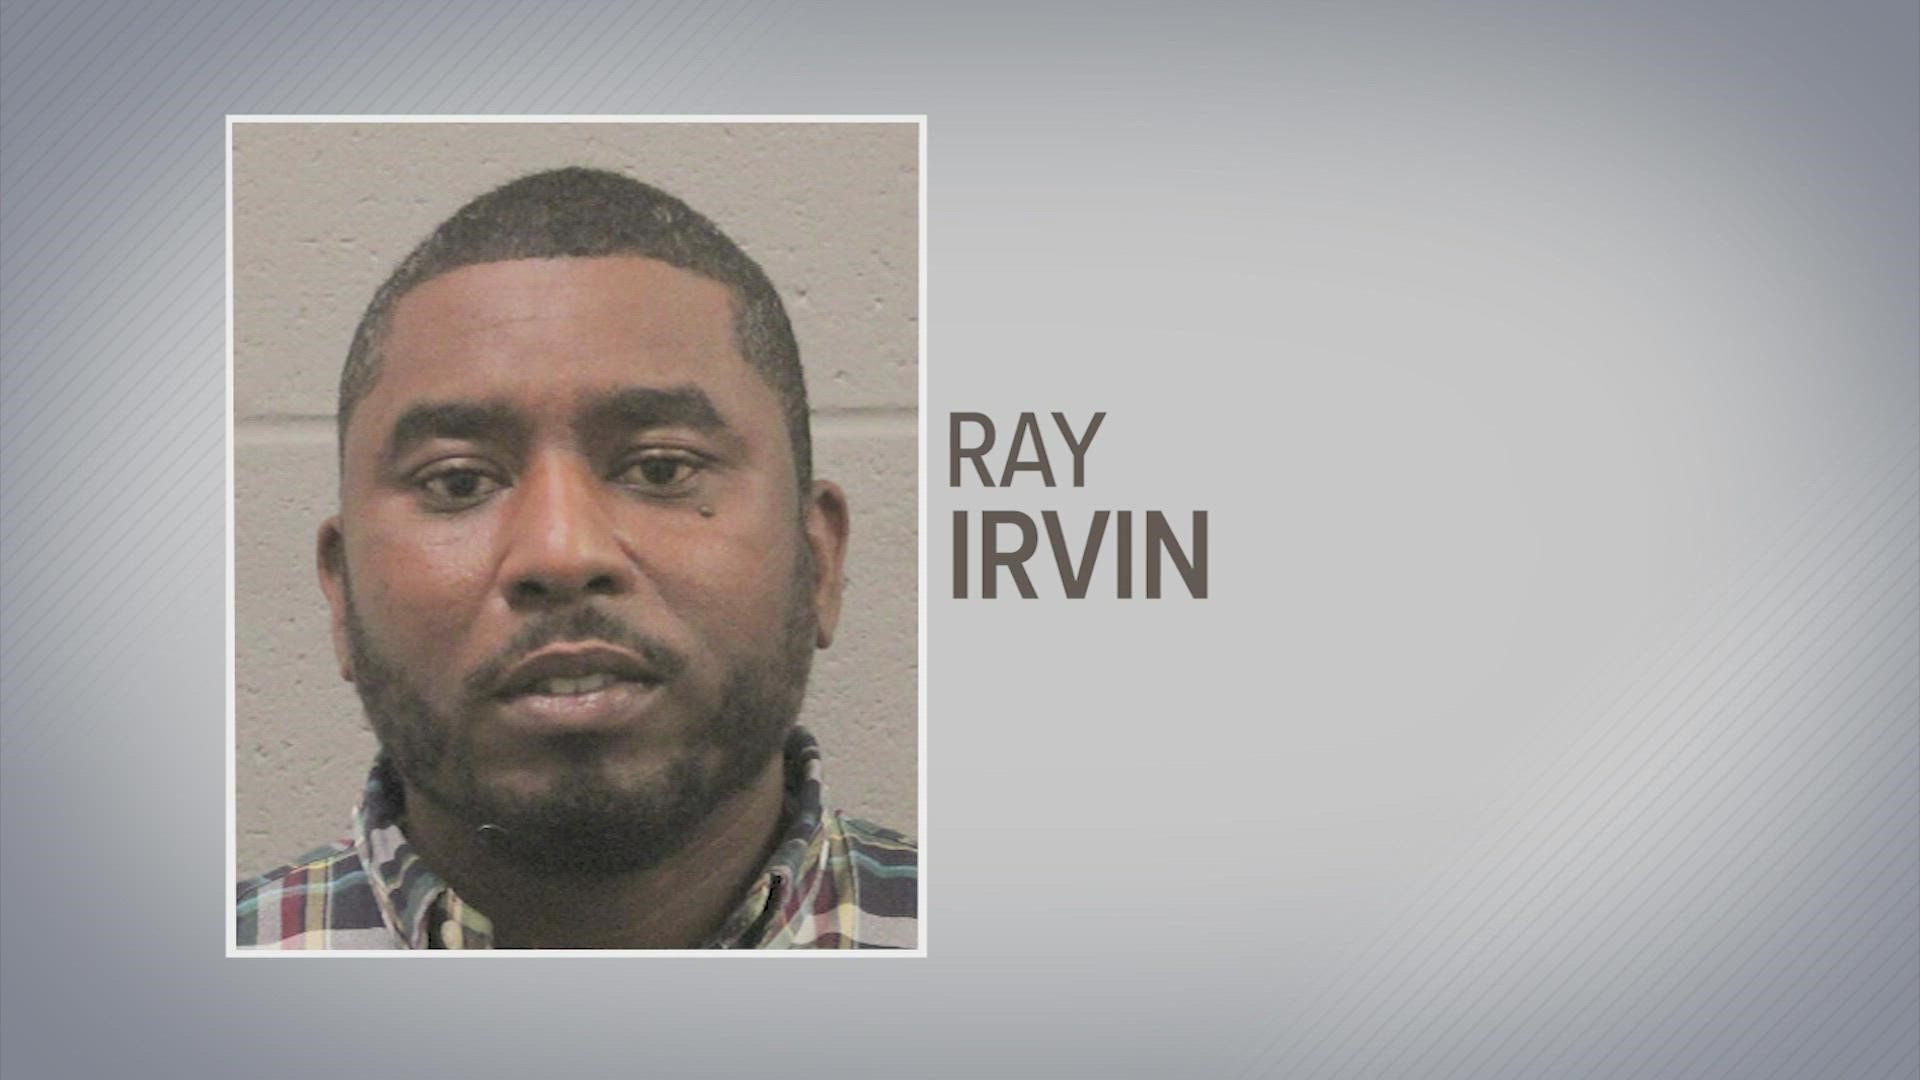 Irvin Ray, a 12-year veteran of the Houston Police Department, is charged with aggravated assault of a family member and burglary and has been relieved of duty.